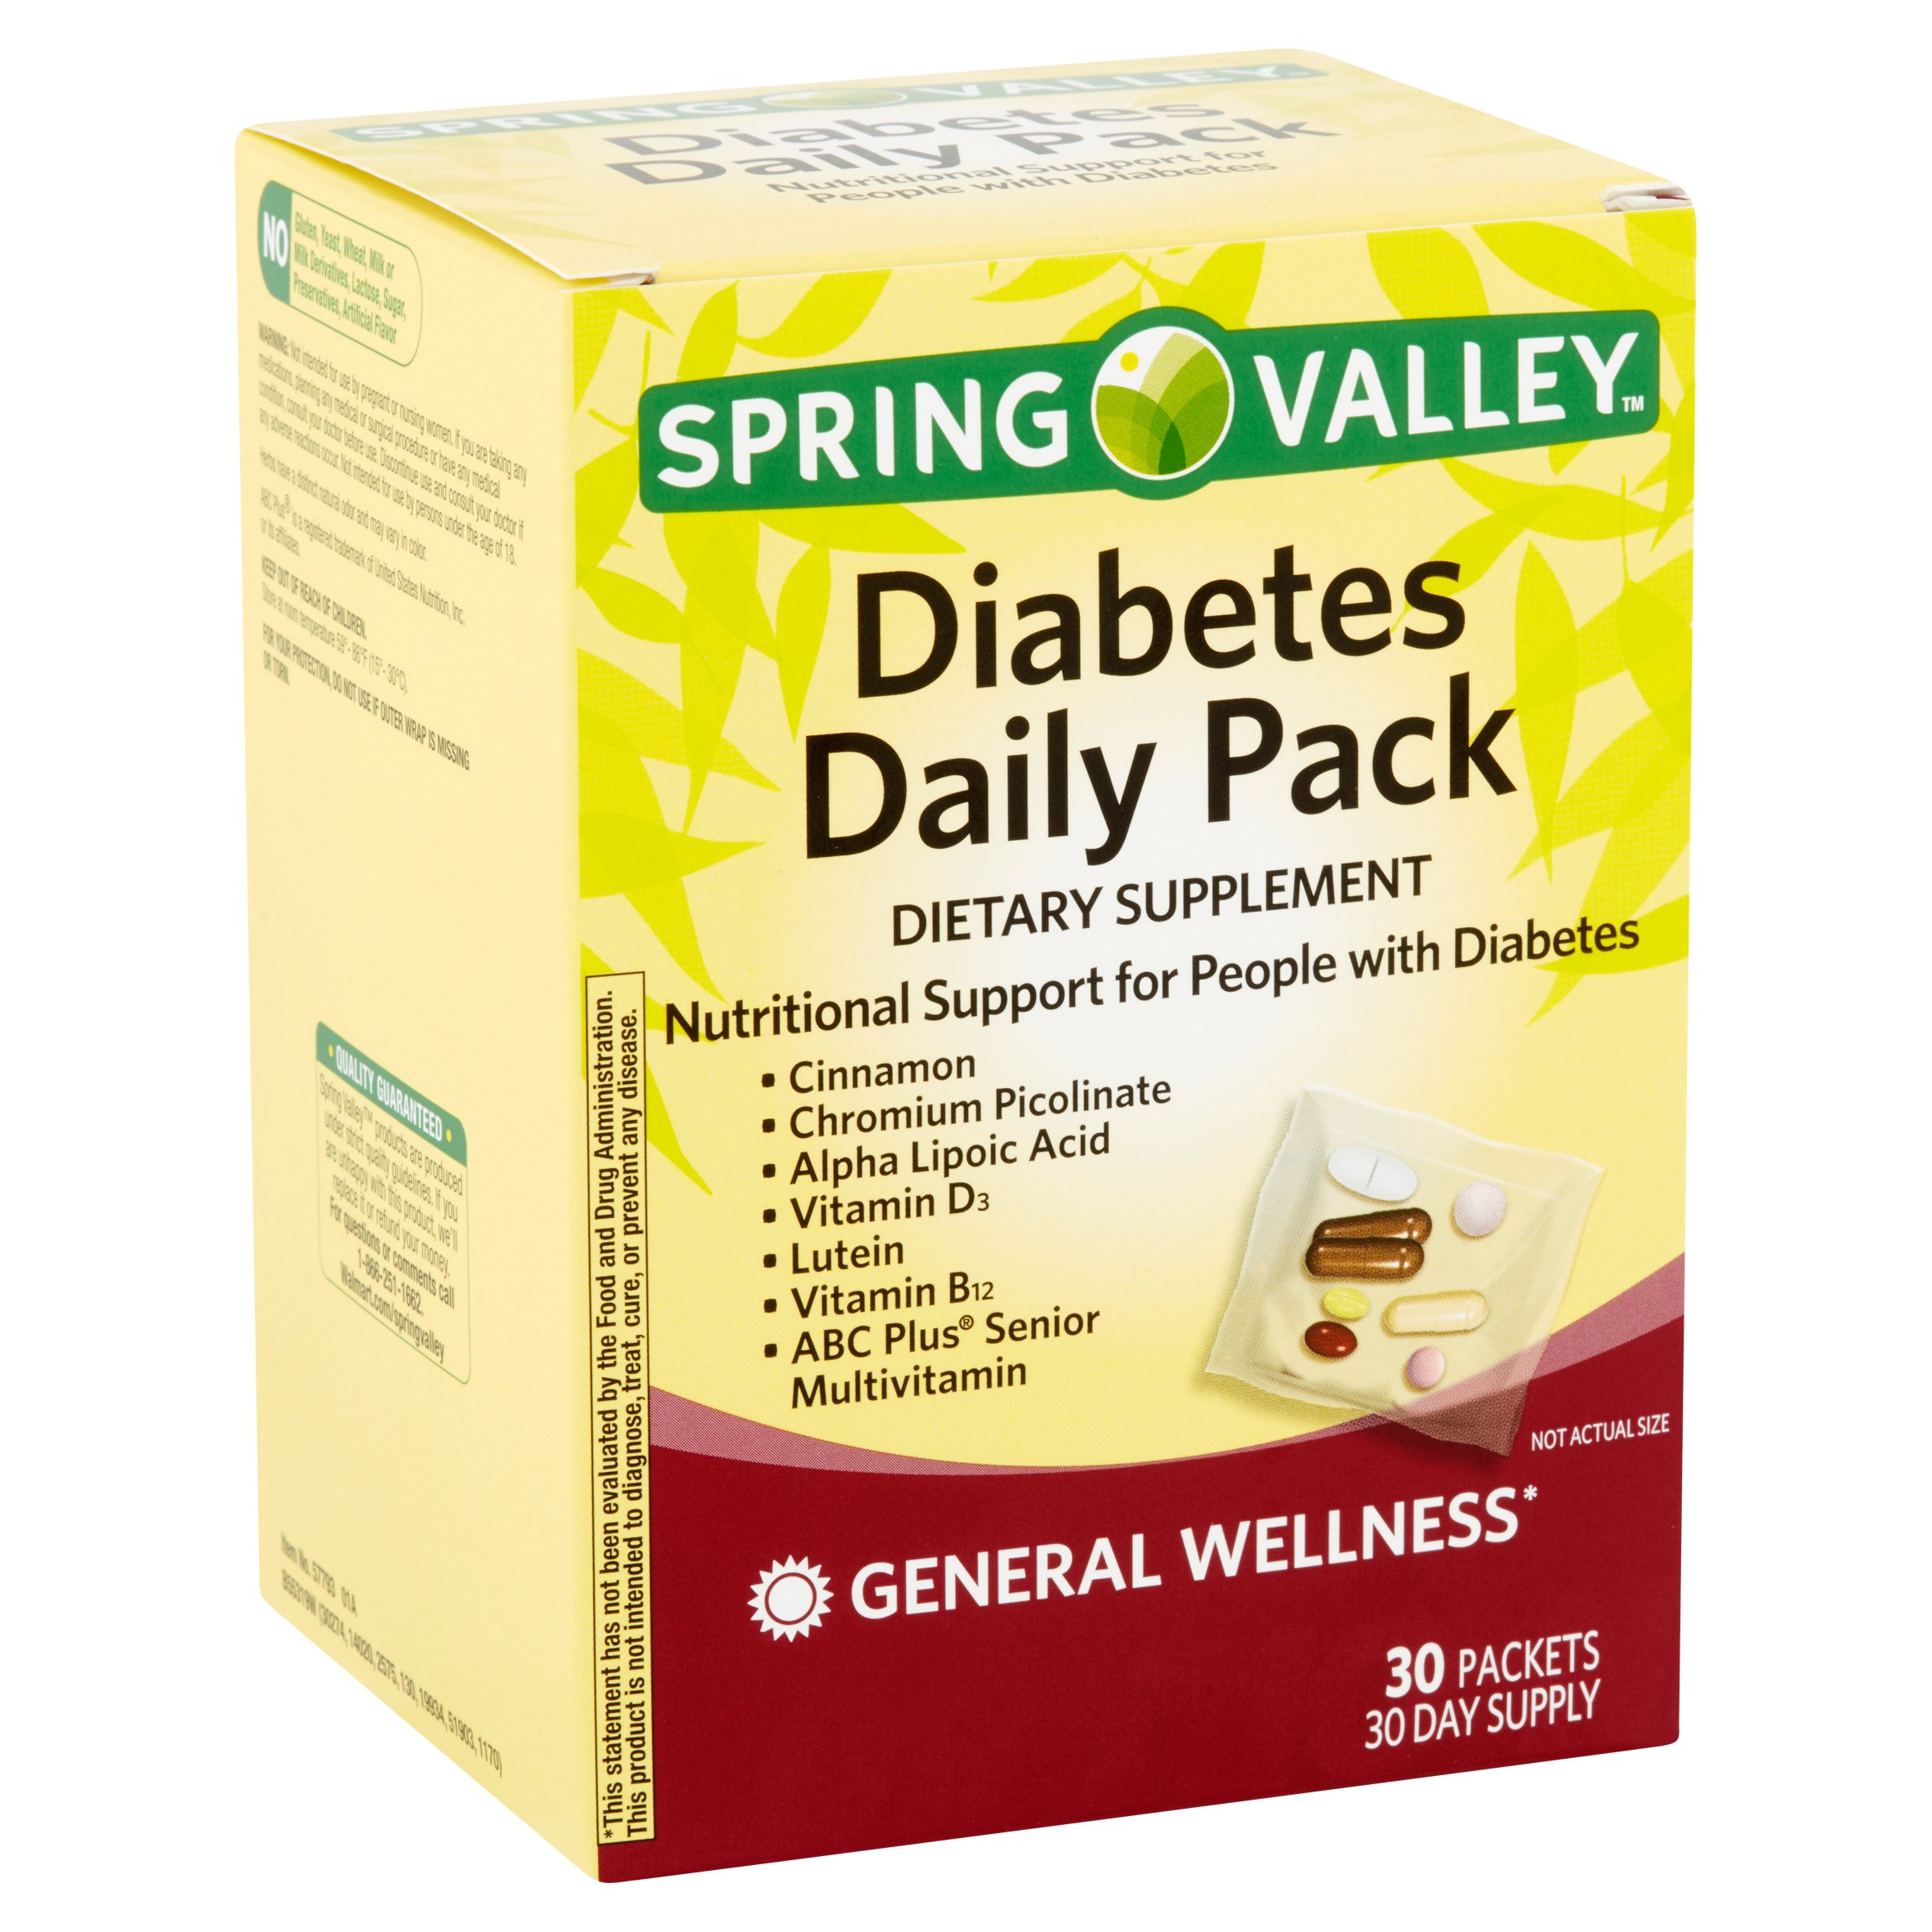 Spring Valley Diabetes Daily Pack, 30 Ct - image 4 of 5